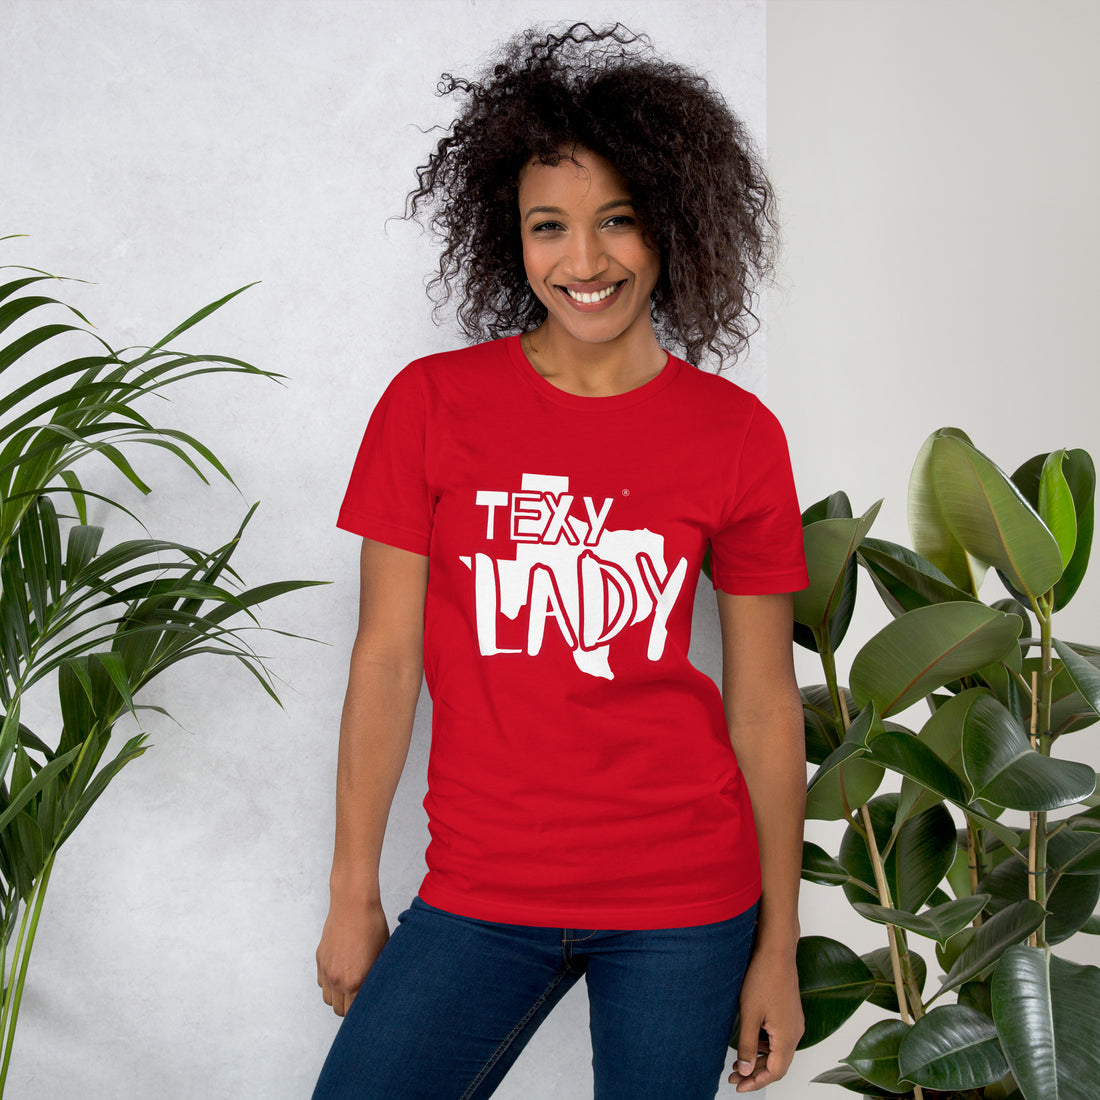 Don't Let Time Slip You By – Get Your Texy T Today!